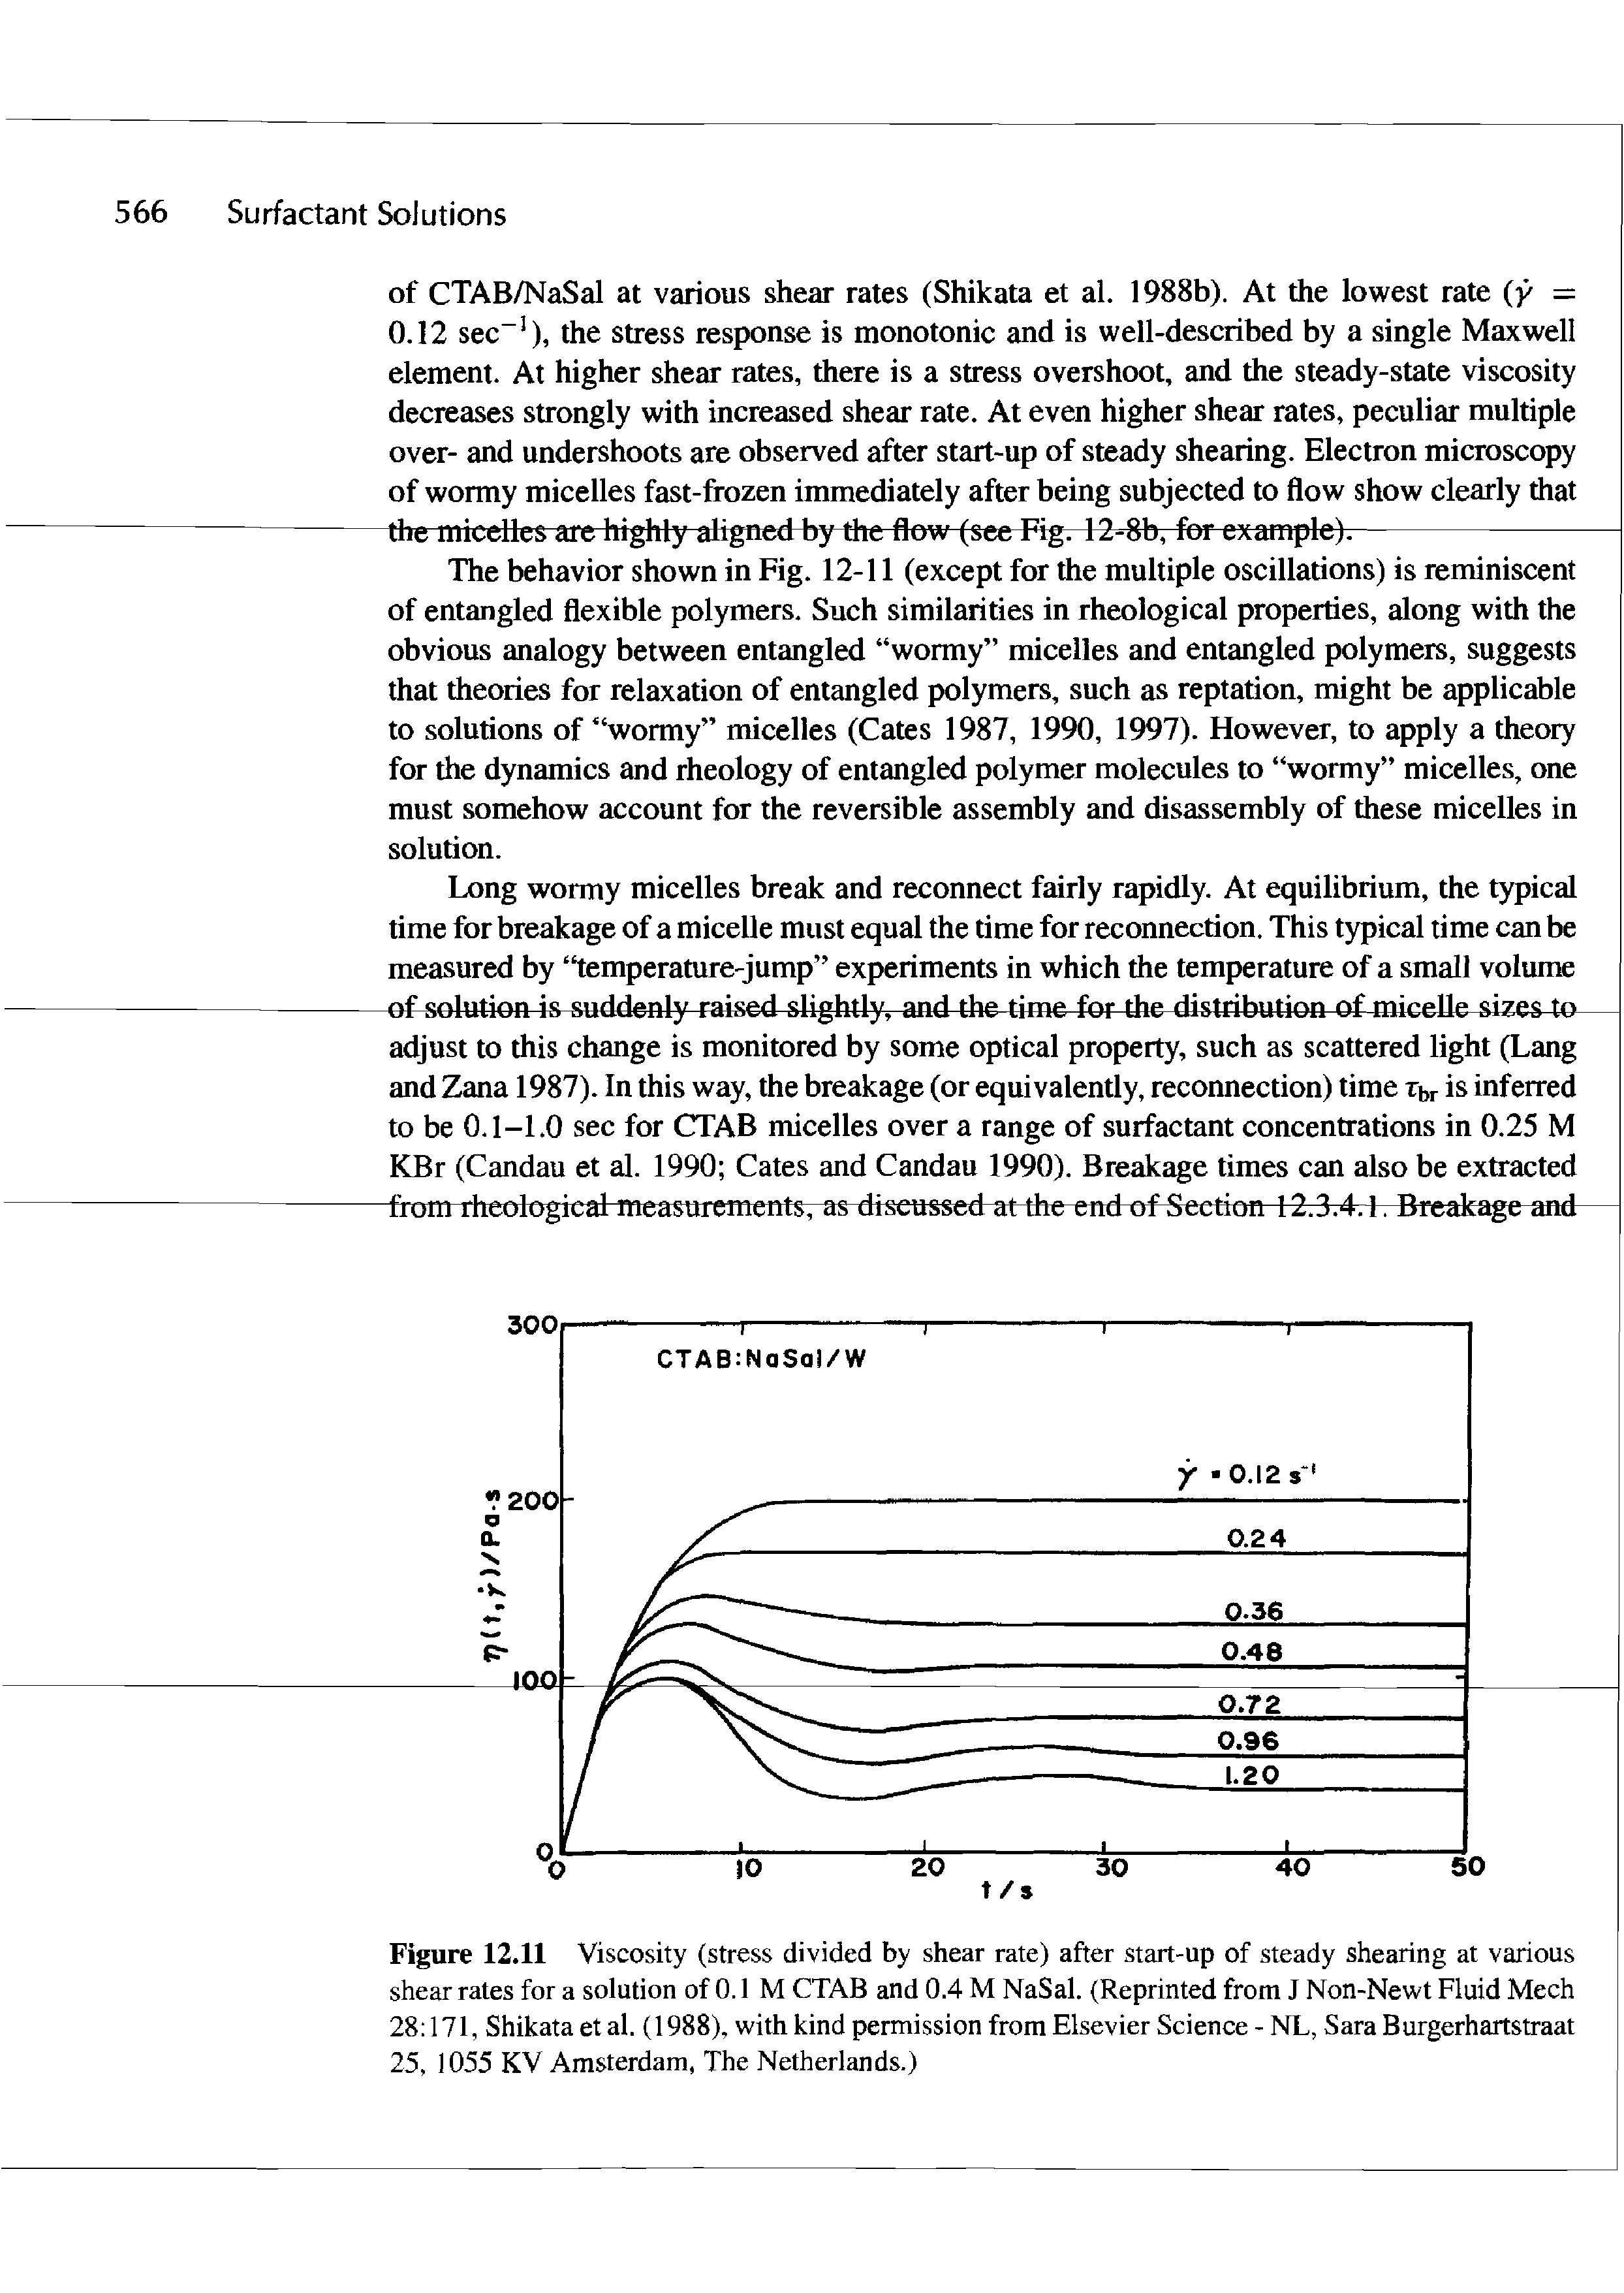 Figure 12.11 Viscosity (stress divided by shear rate) after start-up of steady shearing at various shear rates for a solution of 0.1 M CTAB and 0.4 M NaSal. (Reprinted from J Non-Newt Fluid Mech 28 171, Shikata et al. (1988), with kind permission from Elsevier Science - NL, Sara Burgerhartstraat 25, 1055 KV Amsterdam, The Netherlands.)...